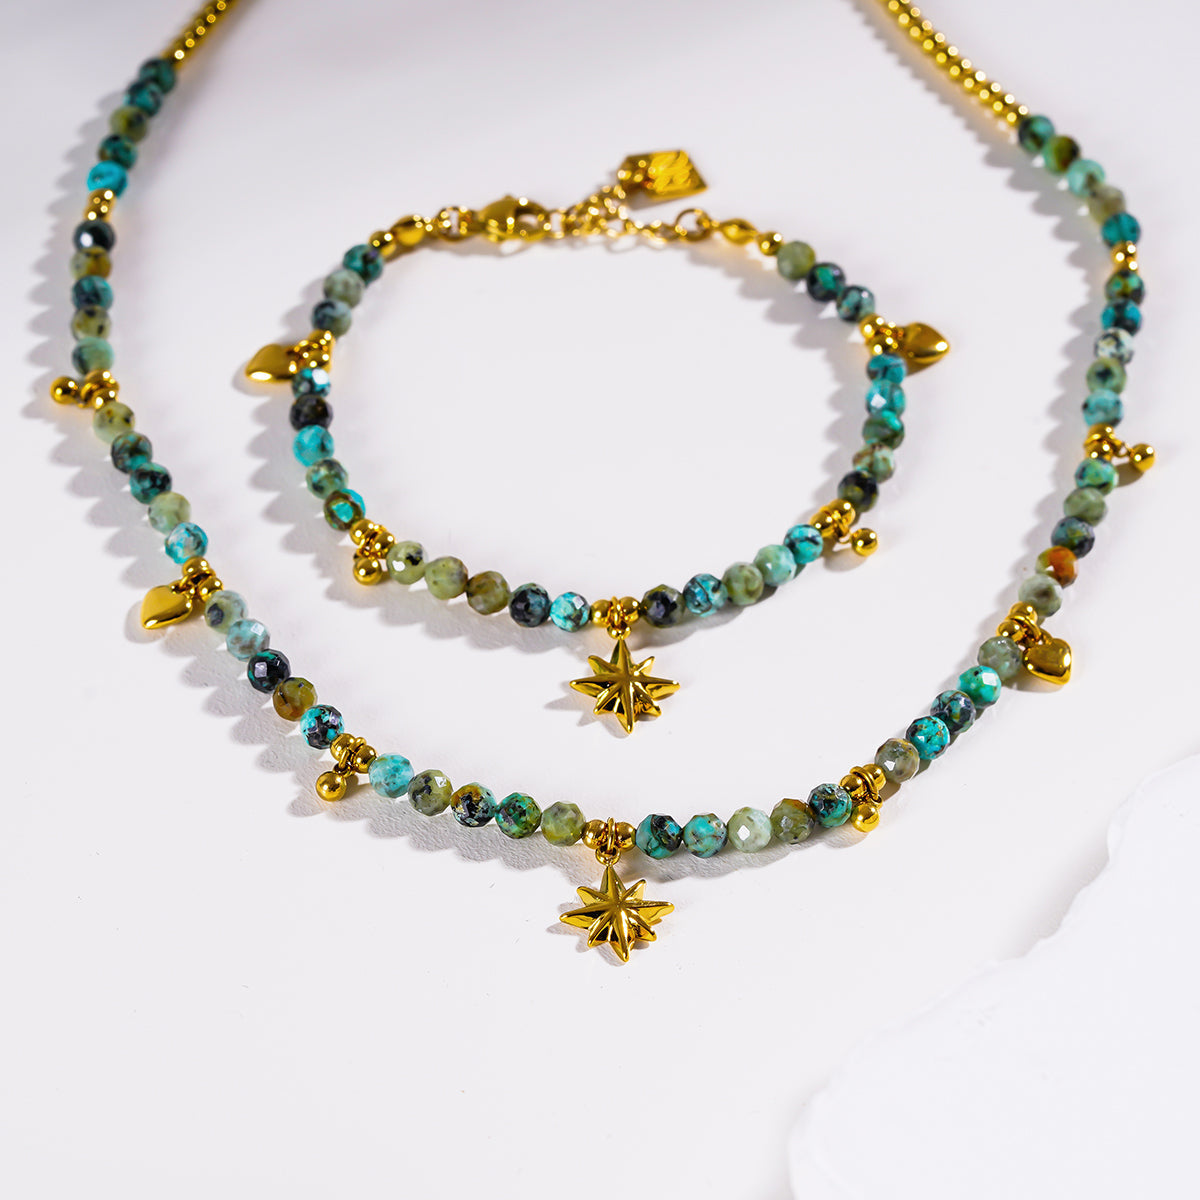 KAVYA: Blue Turquoise Stones with Gold Beads & Charms Chain Bracelet